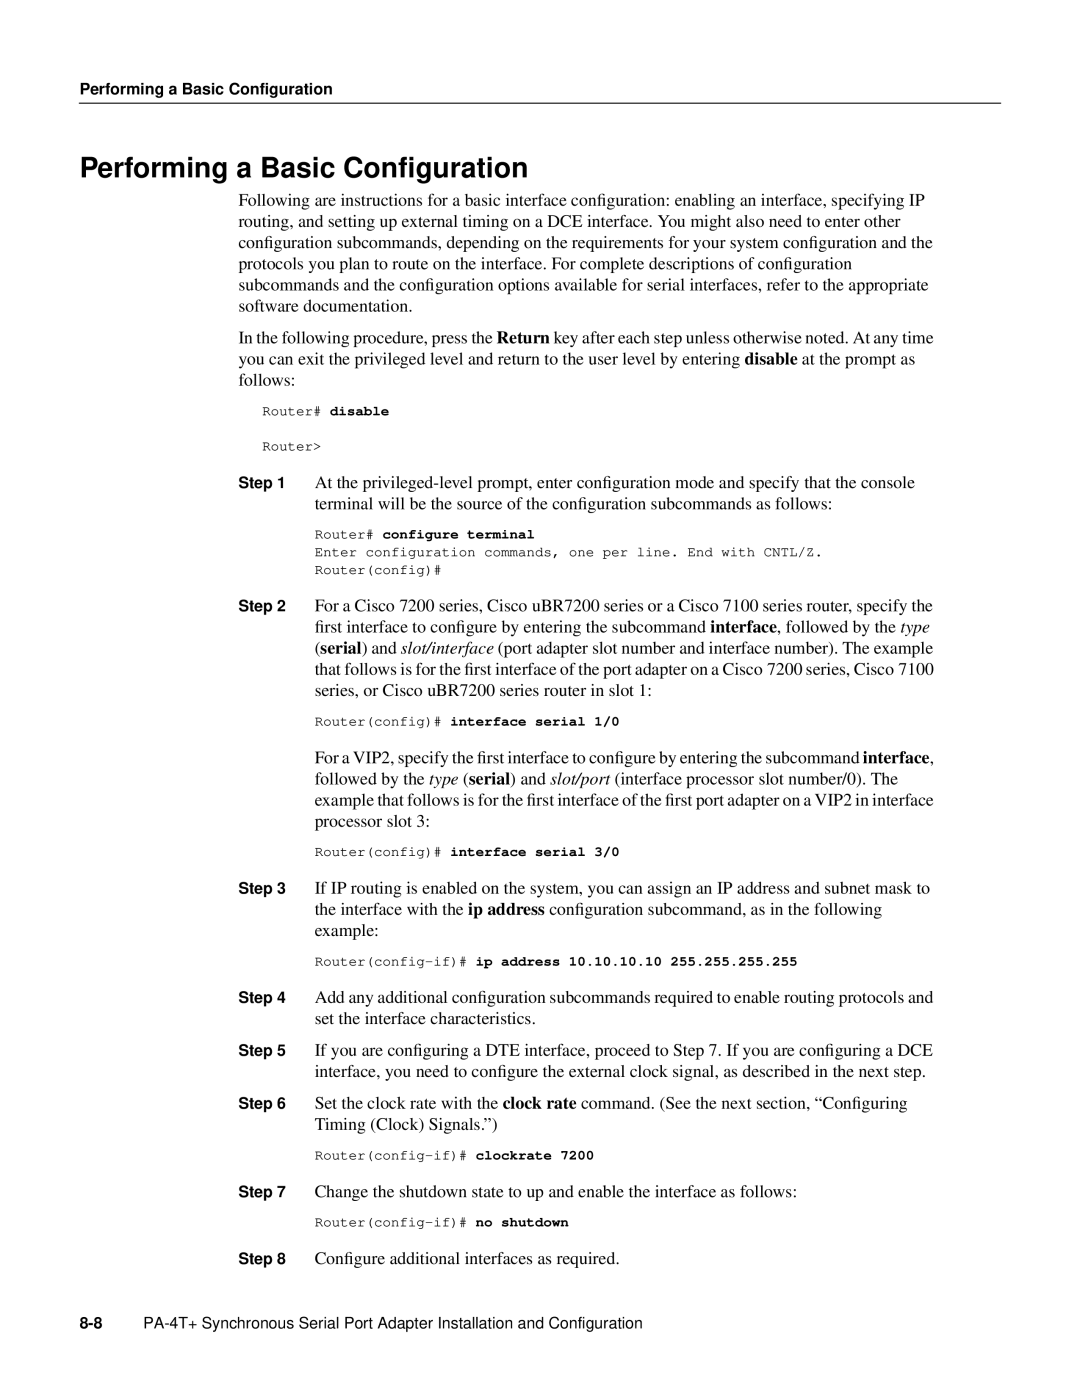 Cisco Systems PA-4T manual Performing a Basic Conﬁguration 